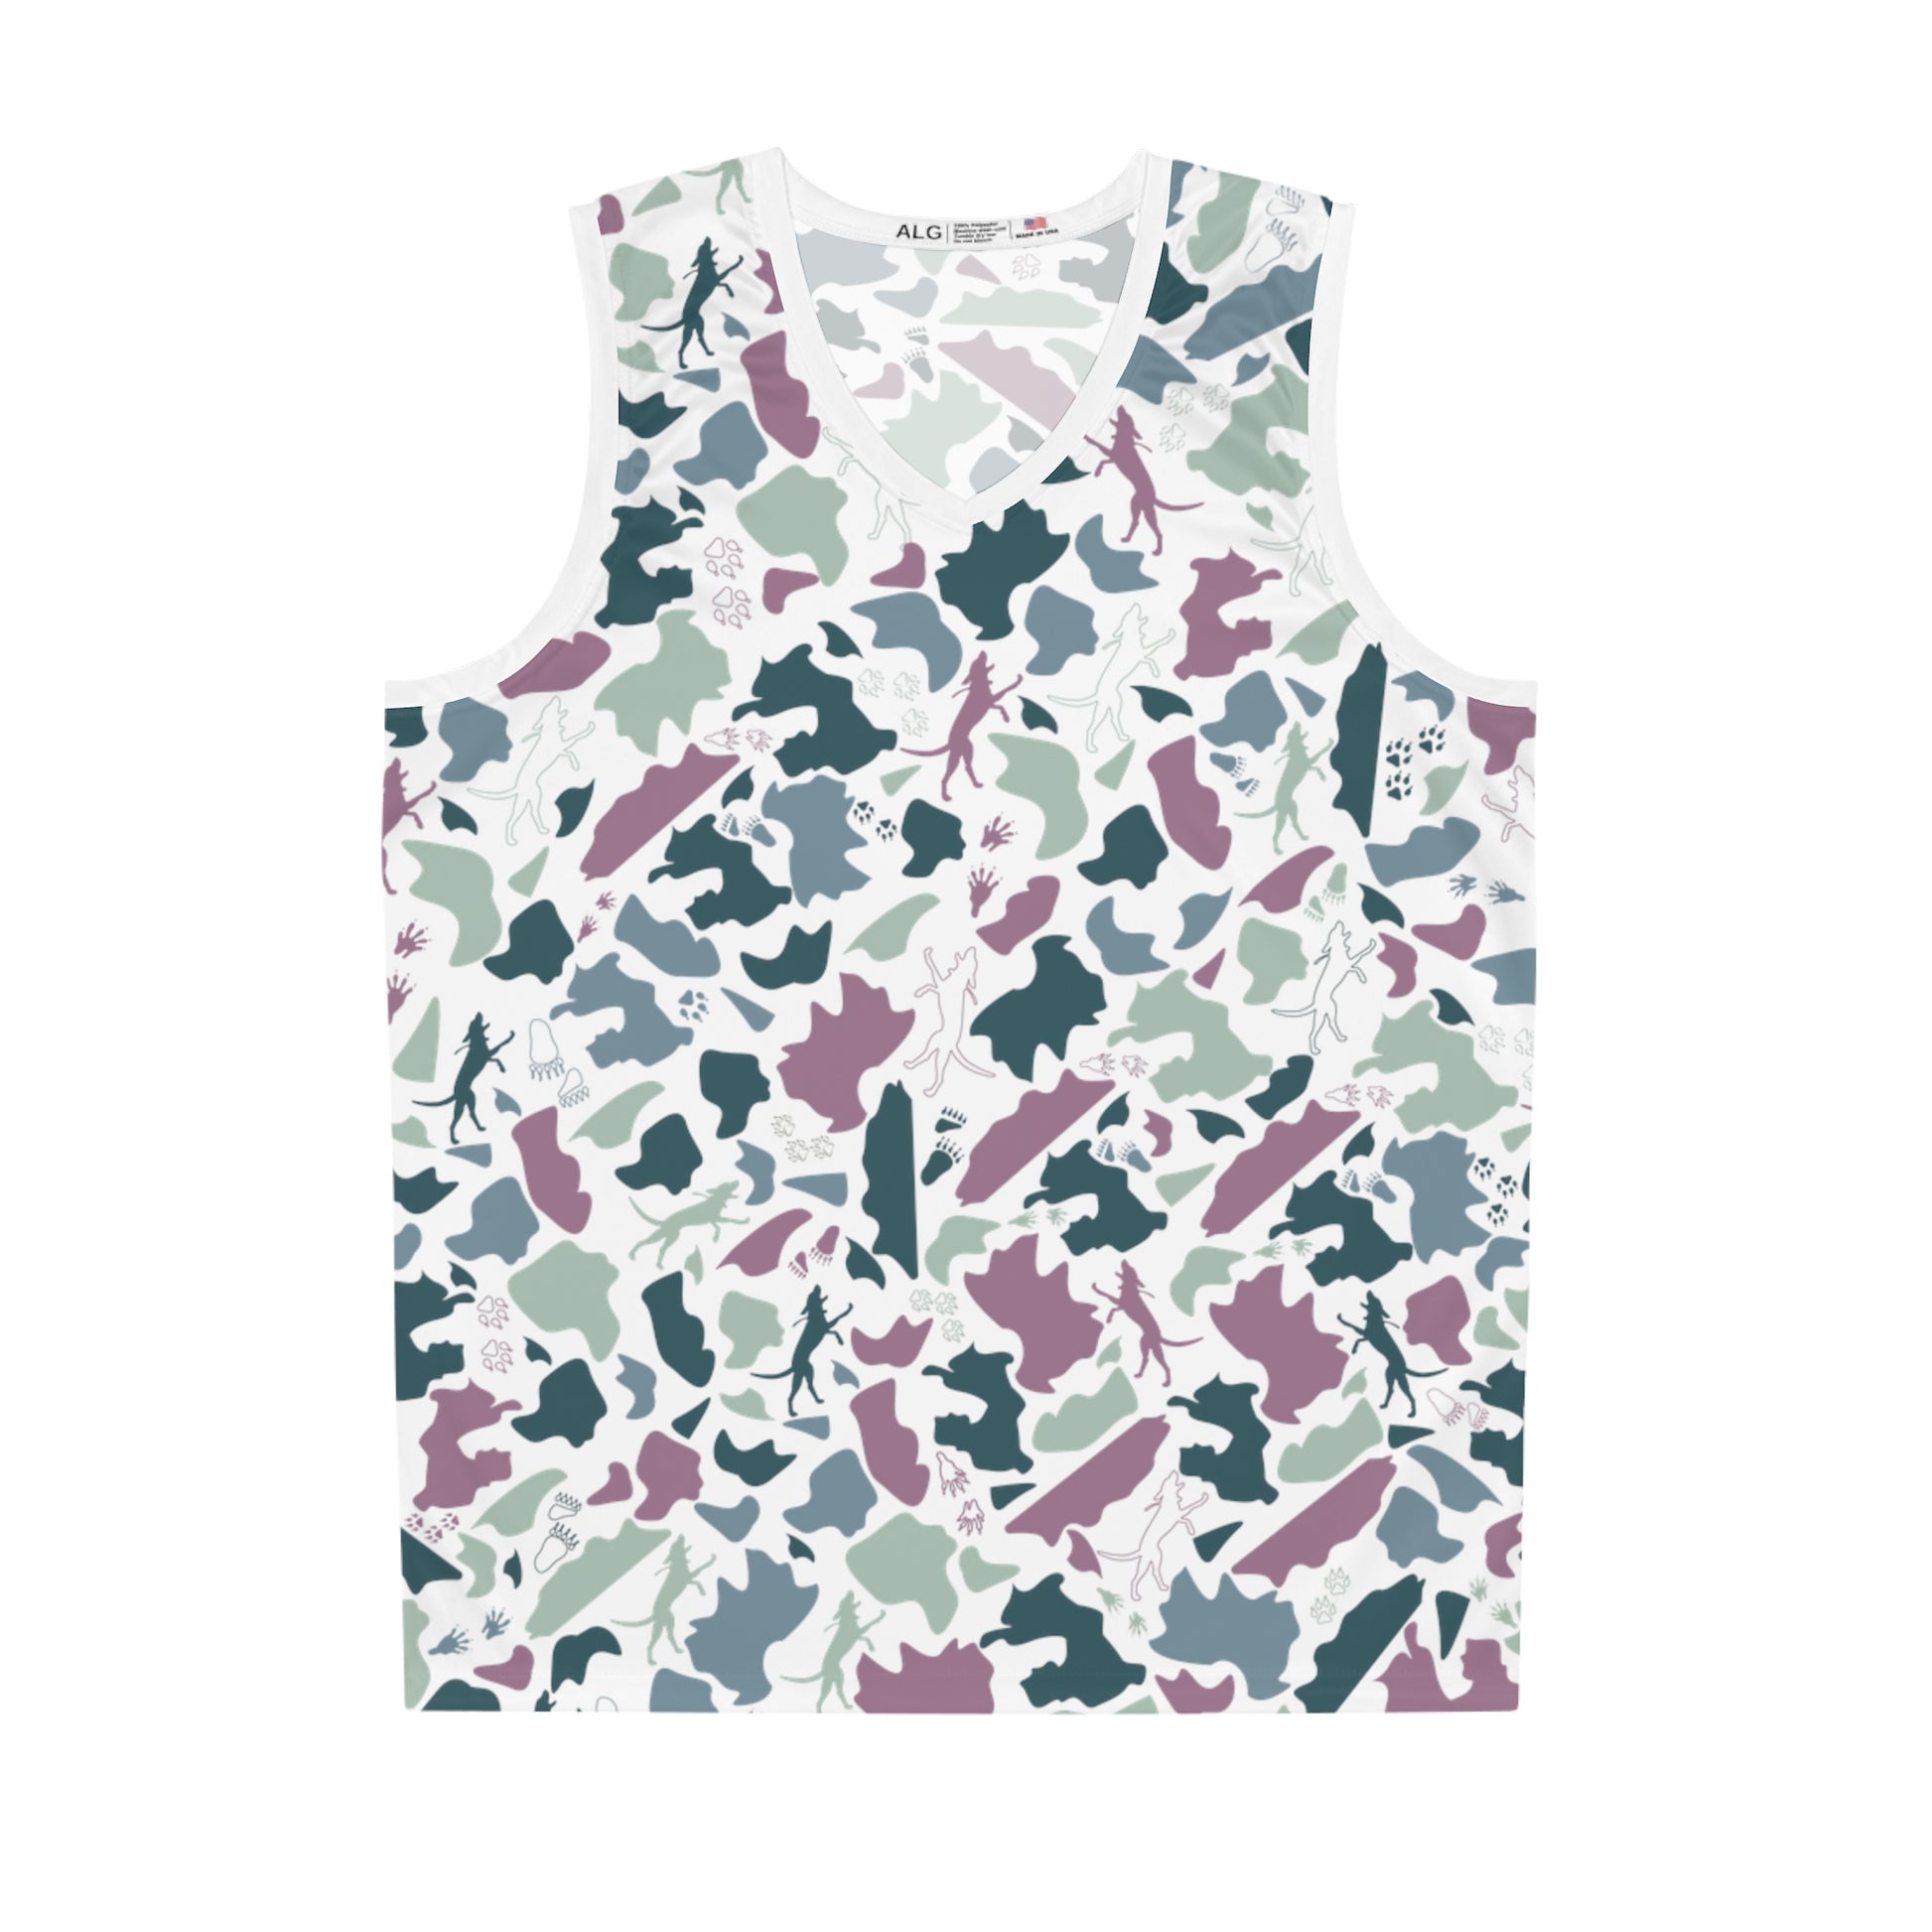 Basketball jersey in teal camouflage 